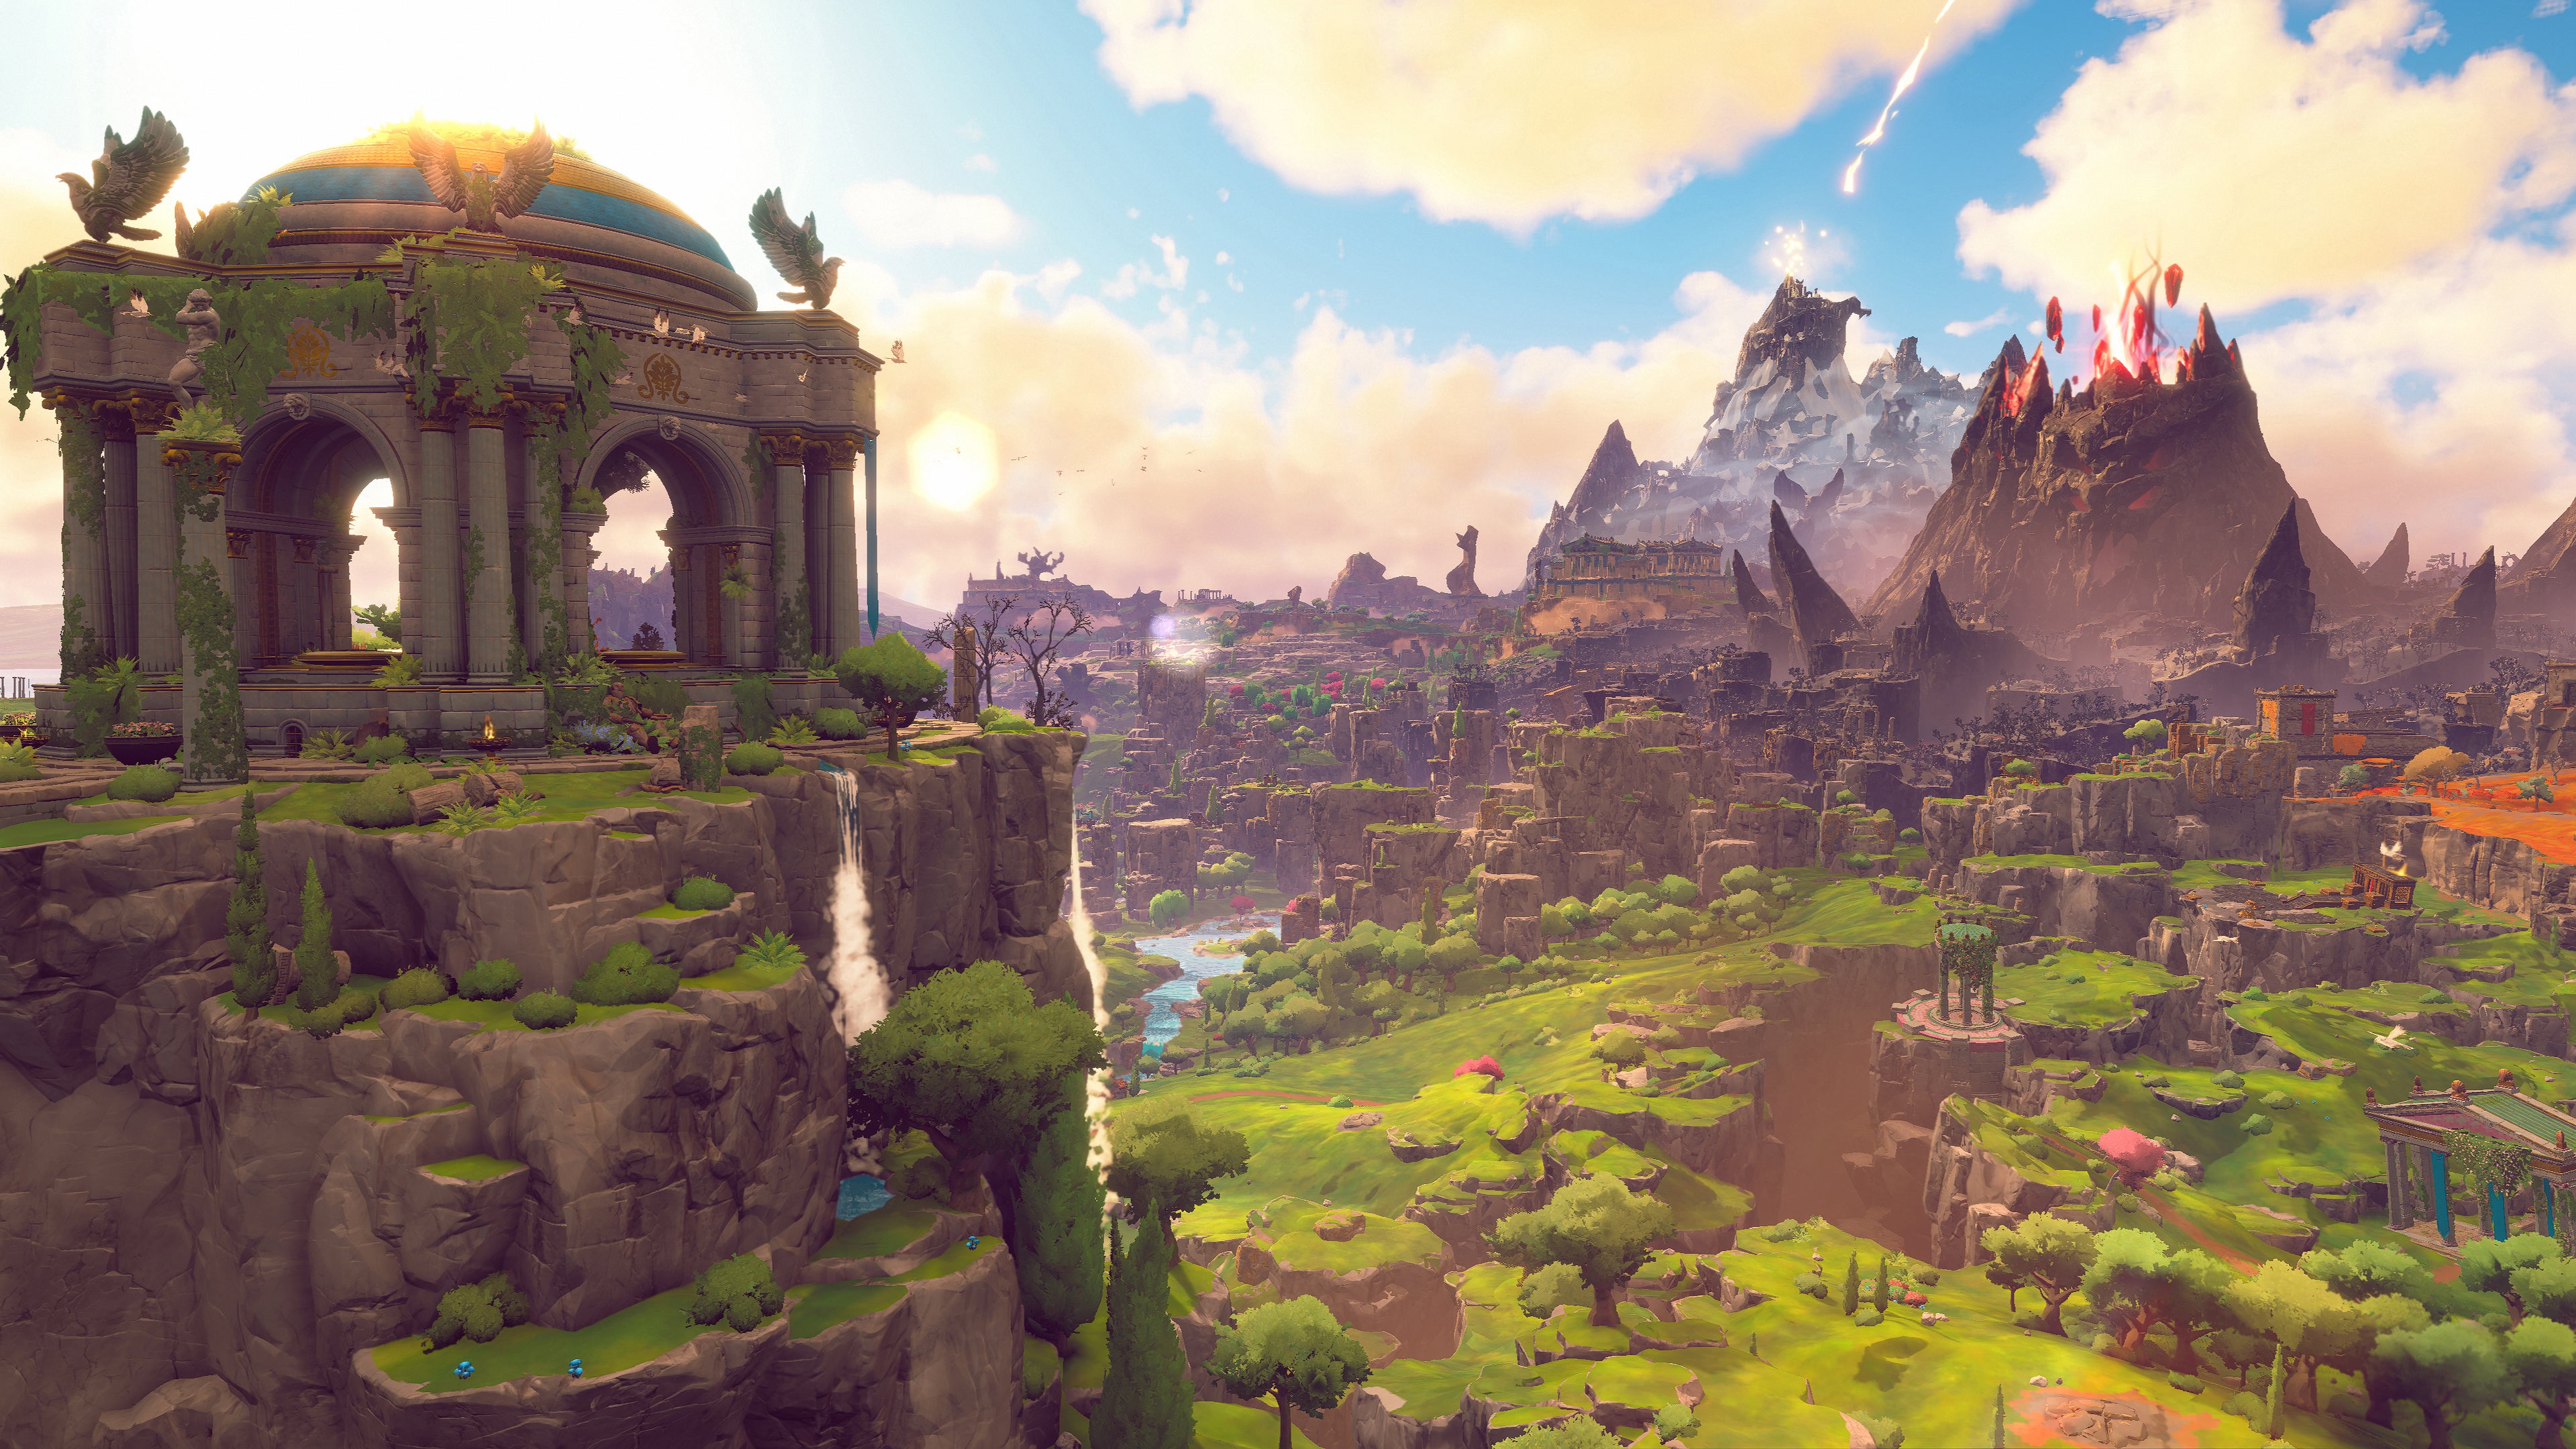 An establishing shot of part of the Golden Isle in Immortals Fenyx Rising, with the Hall of the Gods in the foreground on the left, and the volcano of the Gates of Tartaros on the right.